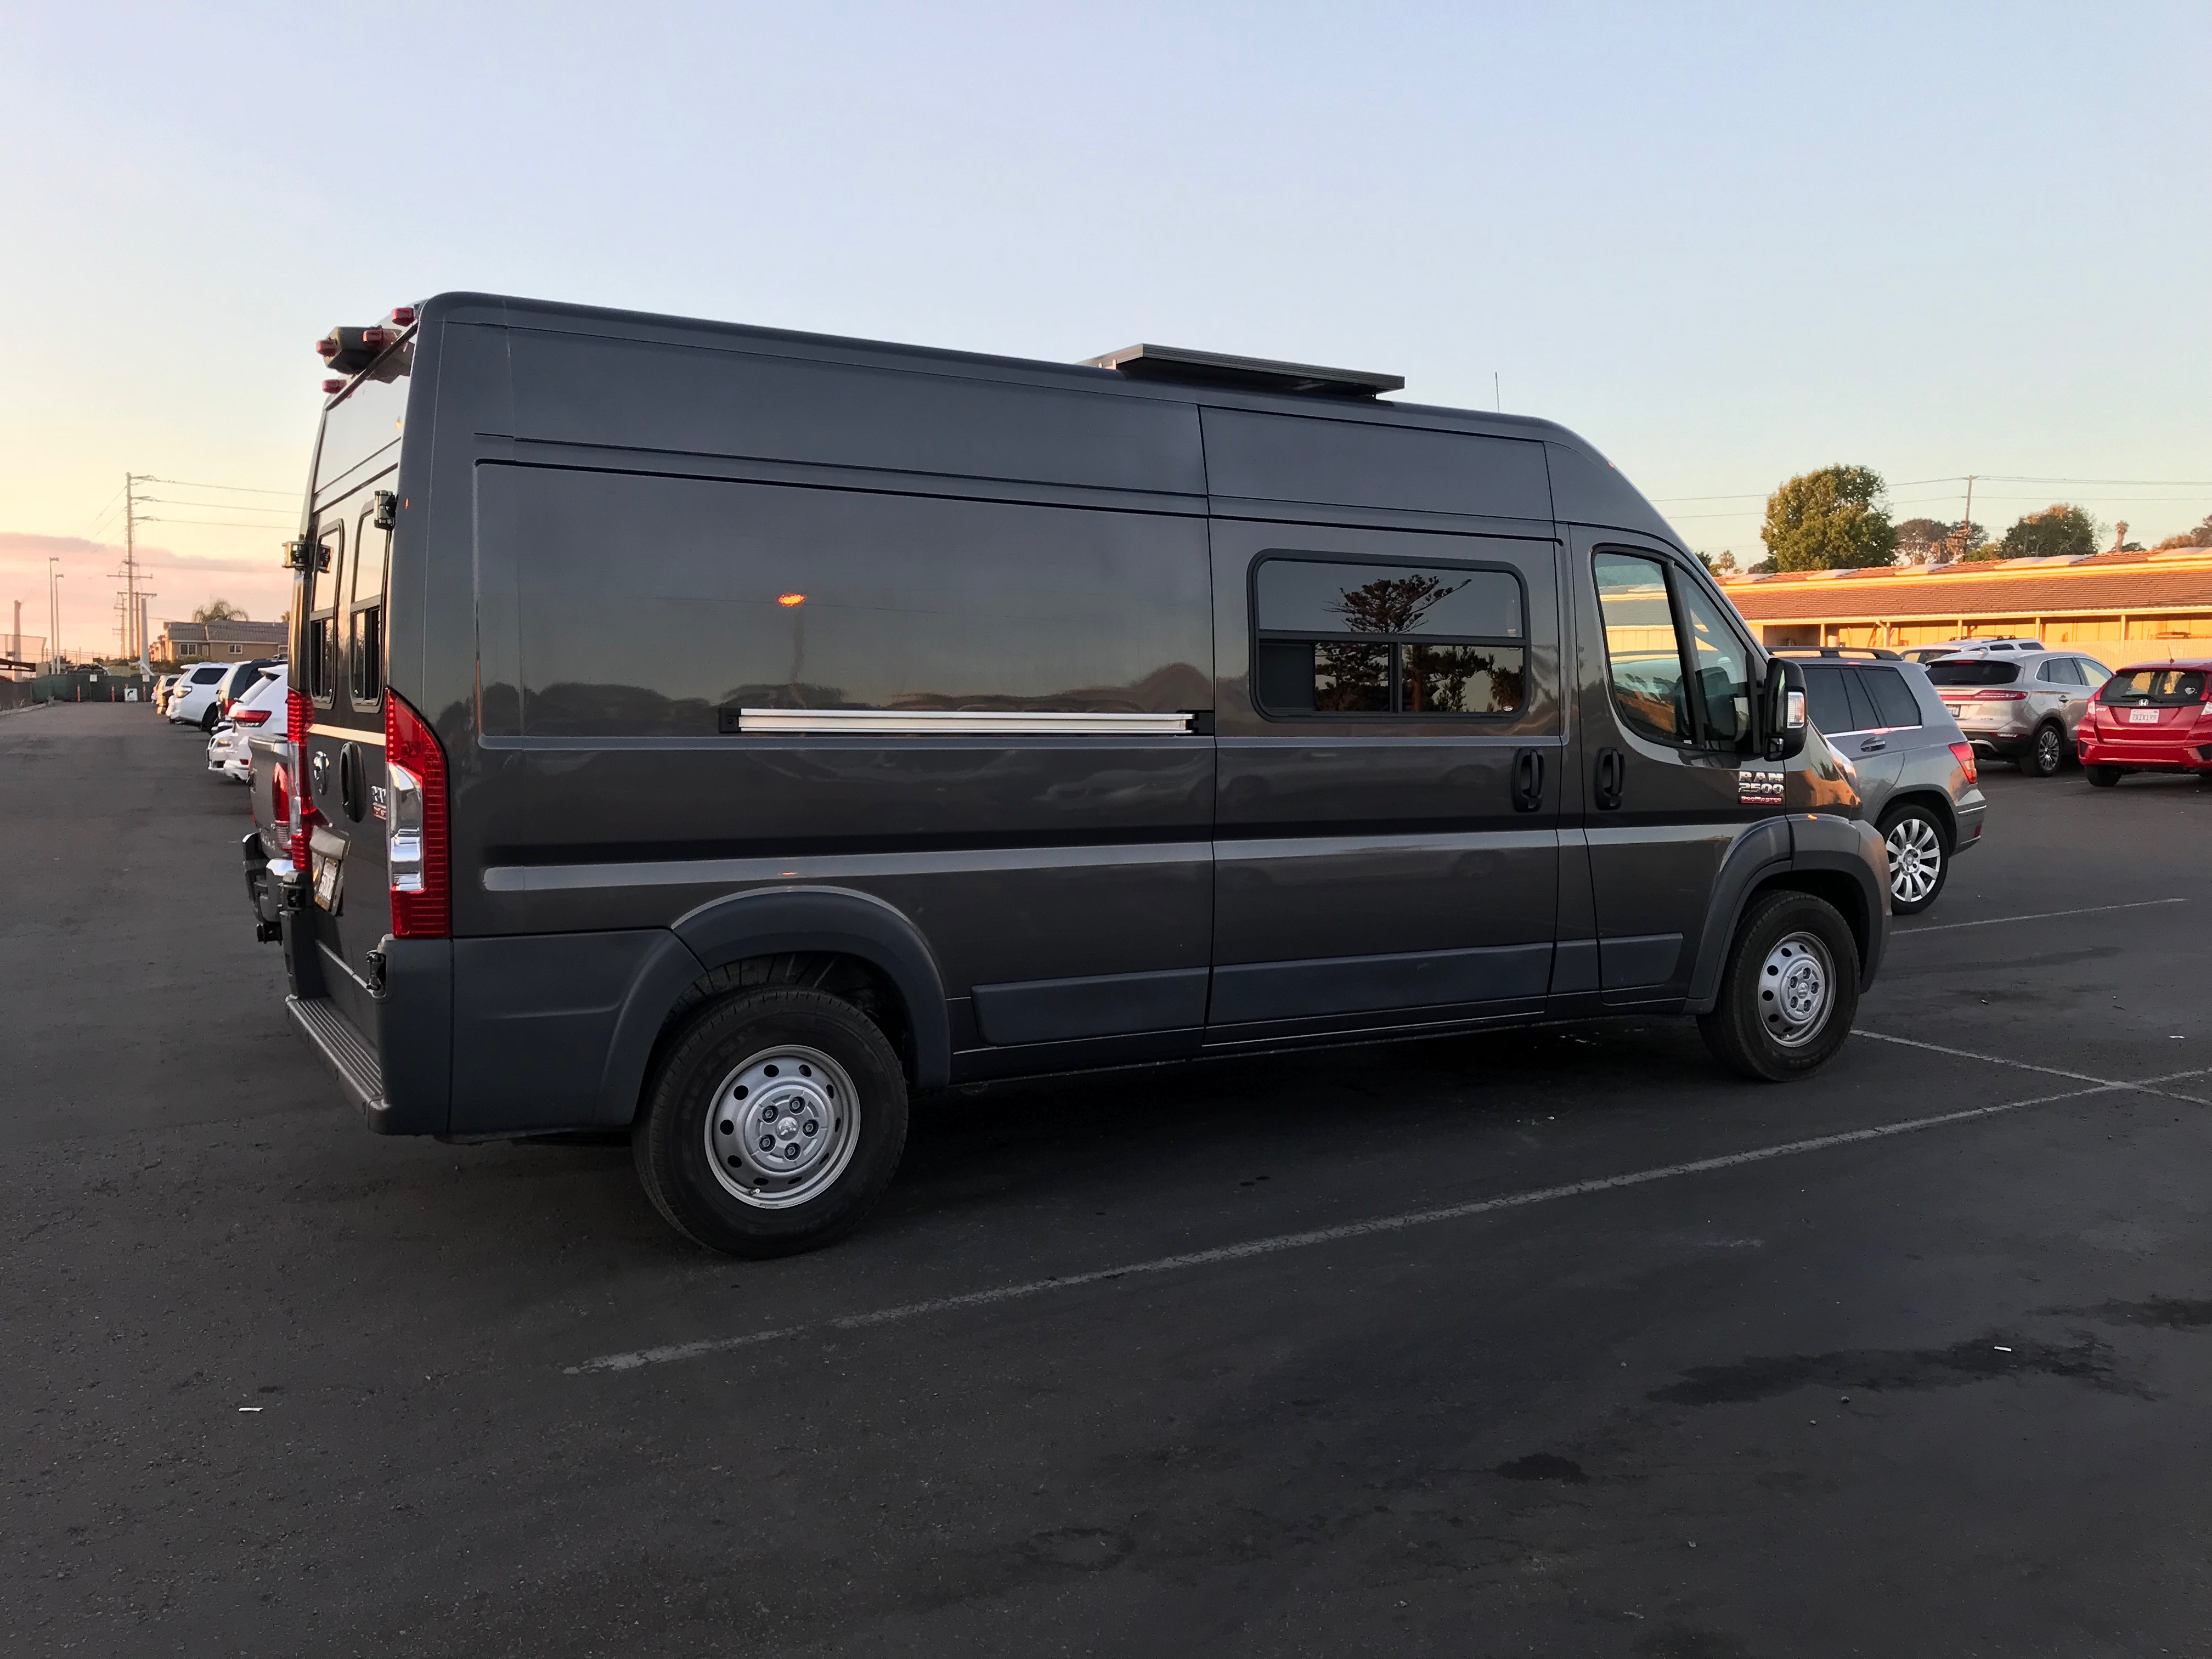 Dimensions of a Ram Promaster 159 WB | Tips to Prepare for Van Life